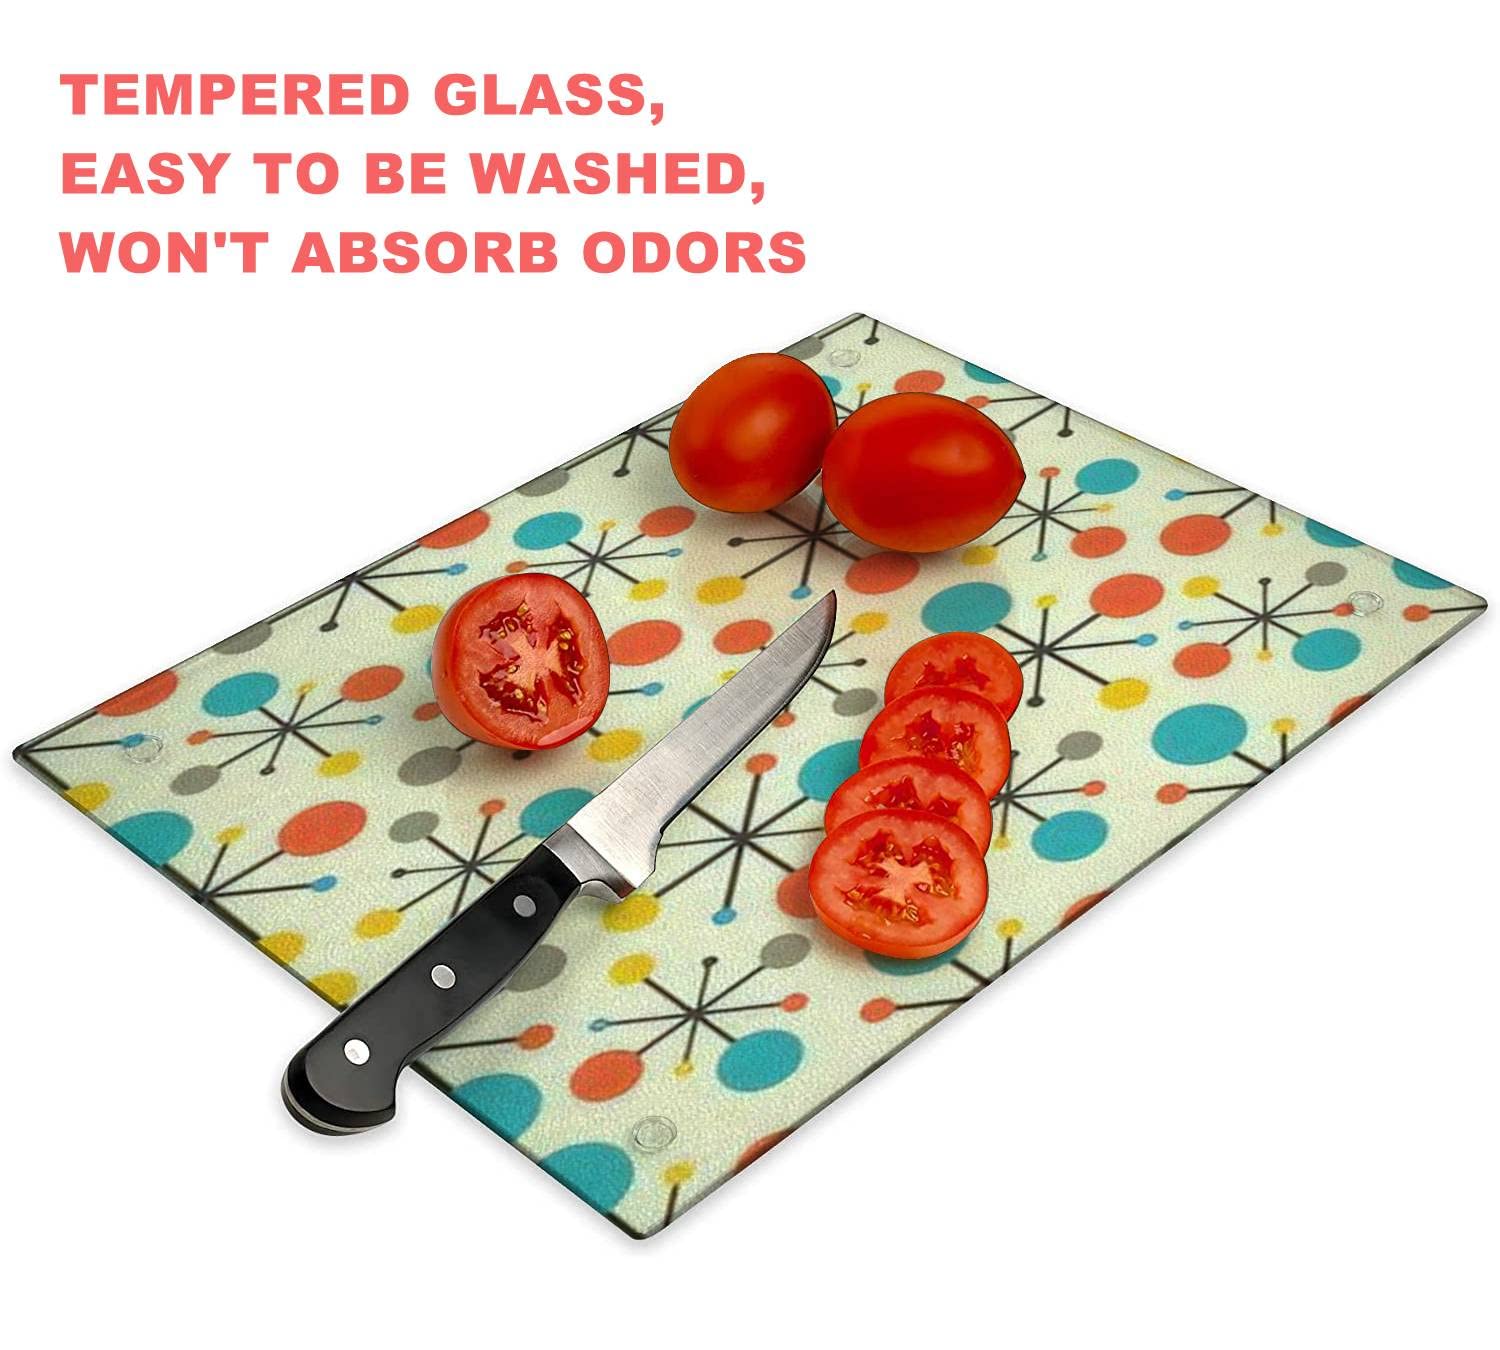 Tempered Glass Cutting Board Mid century fifties modern atomic retro colors seamless Part of Tableware Kitchen Decorative Cutting Board with Non-slip Legs, Serving Board, Large Size, 15" x 11"